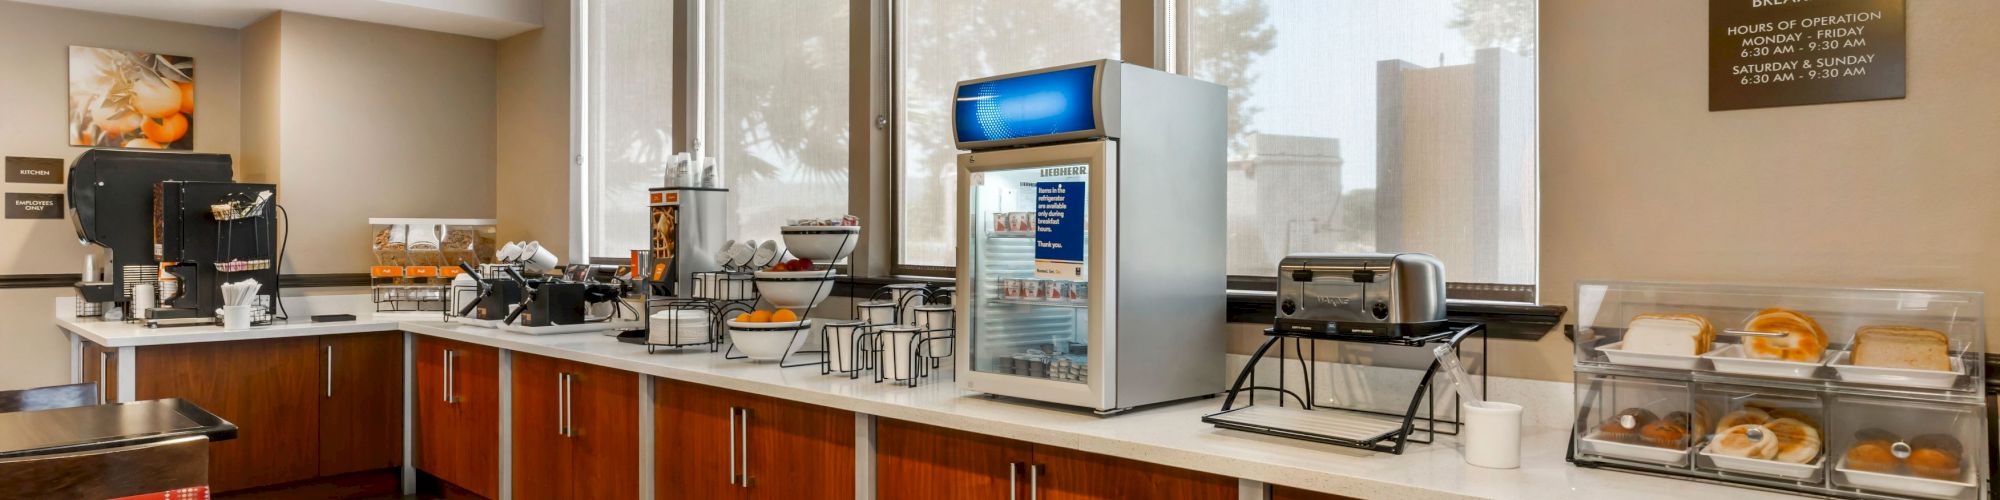 The image shows a hotel breakfast area with a coffee machine, juice dispenser, toaster, and various food items on the countertop.